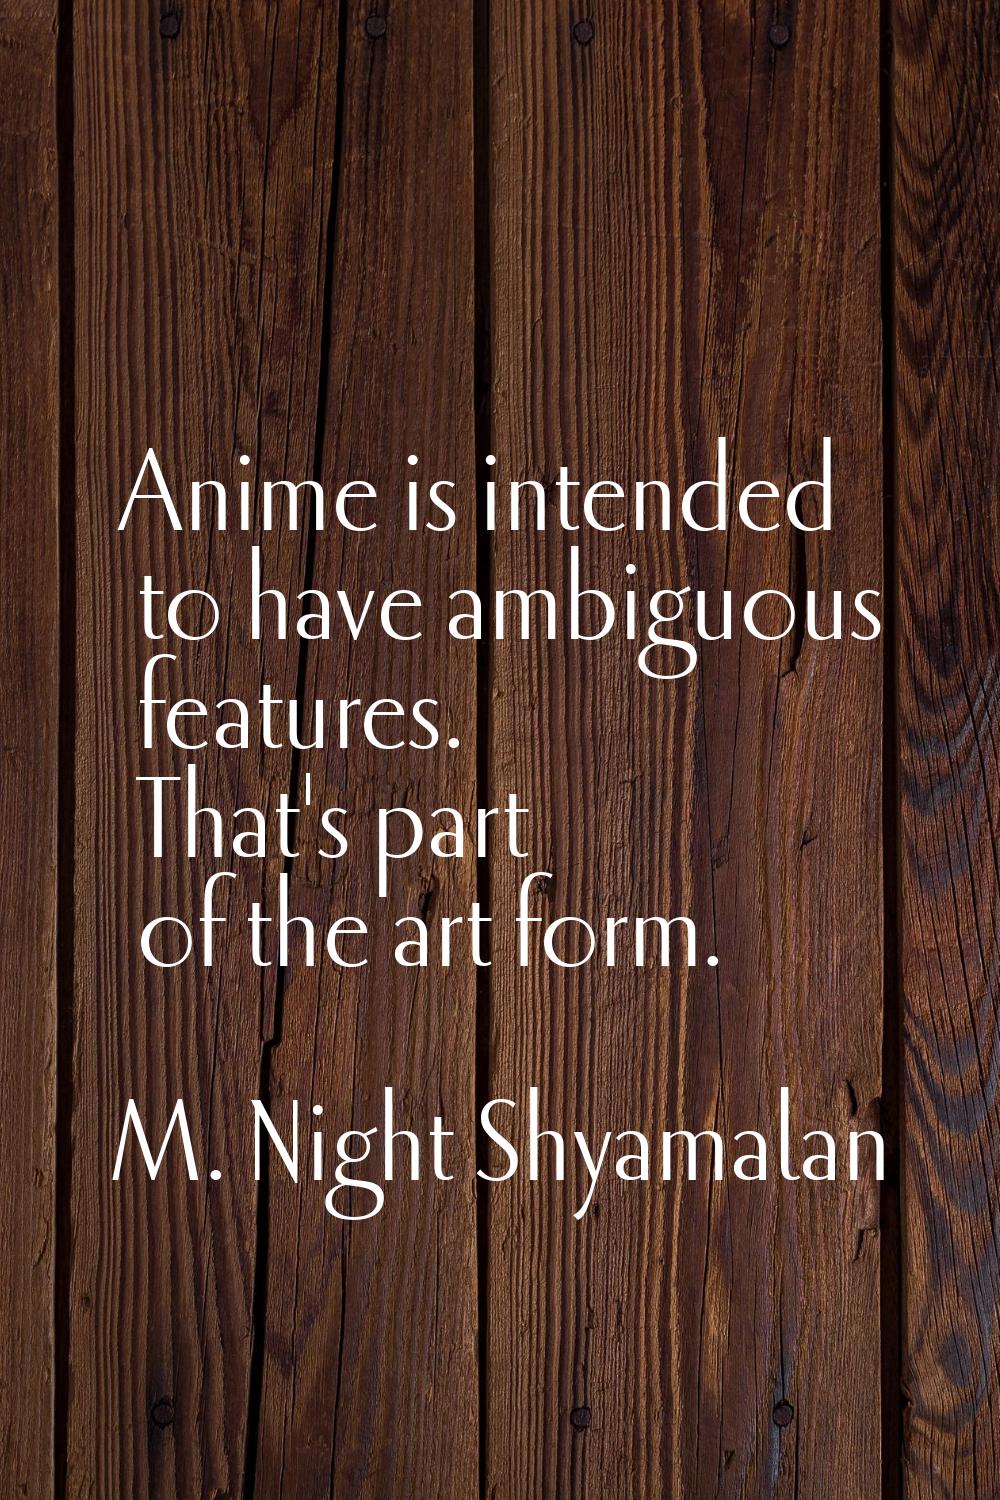 Anime is intended to have ambiguous features. That's part of the art form.